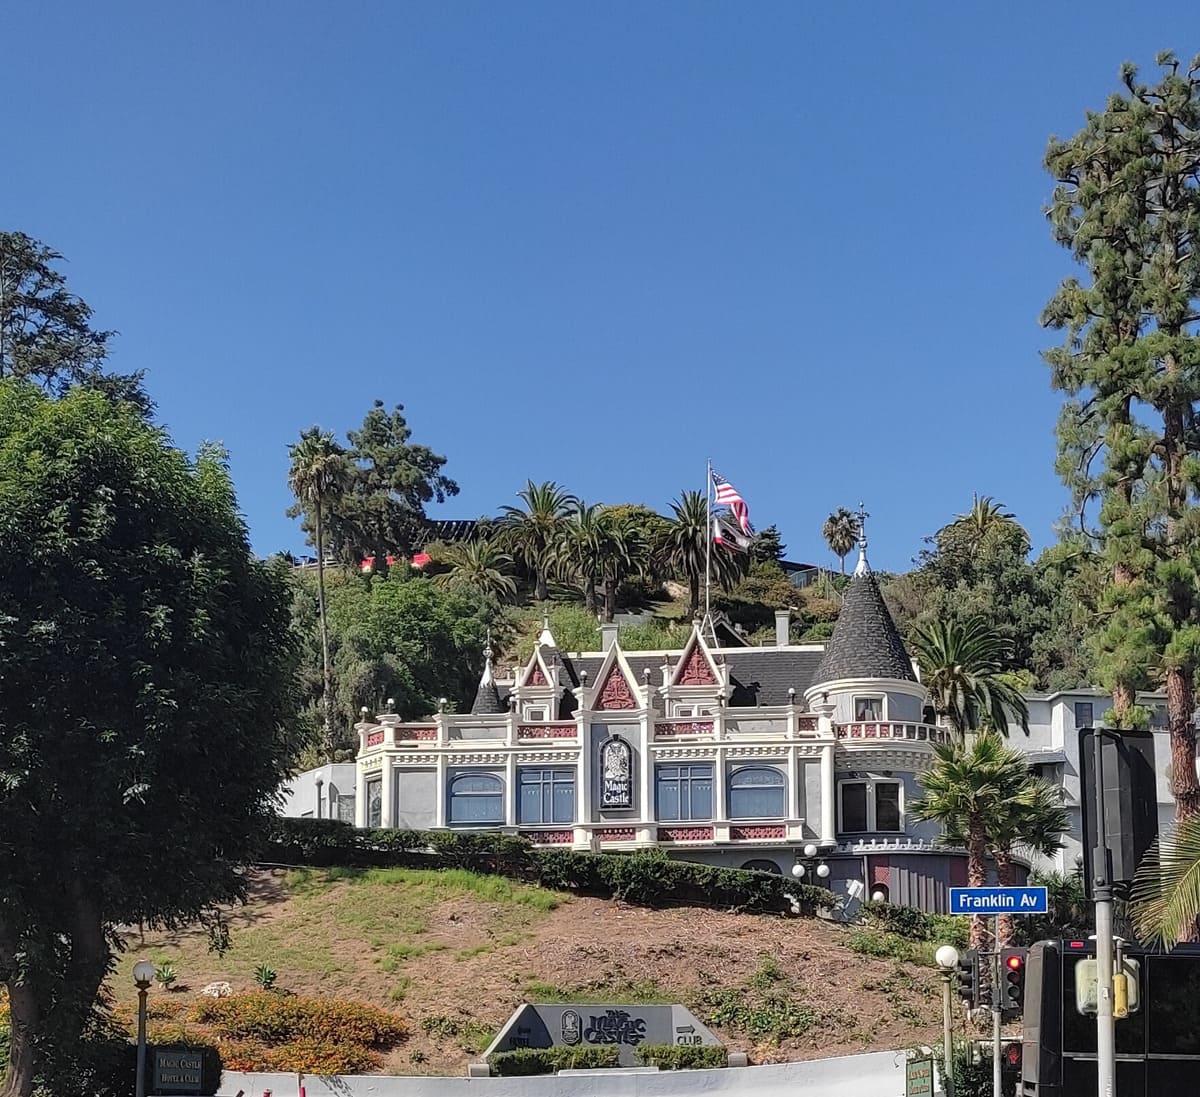 The Magic Castle, clubhouse of the Academy for Magical Arts, is right next to the hotel